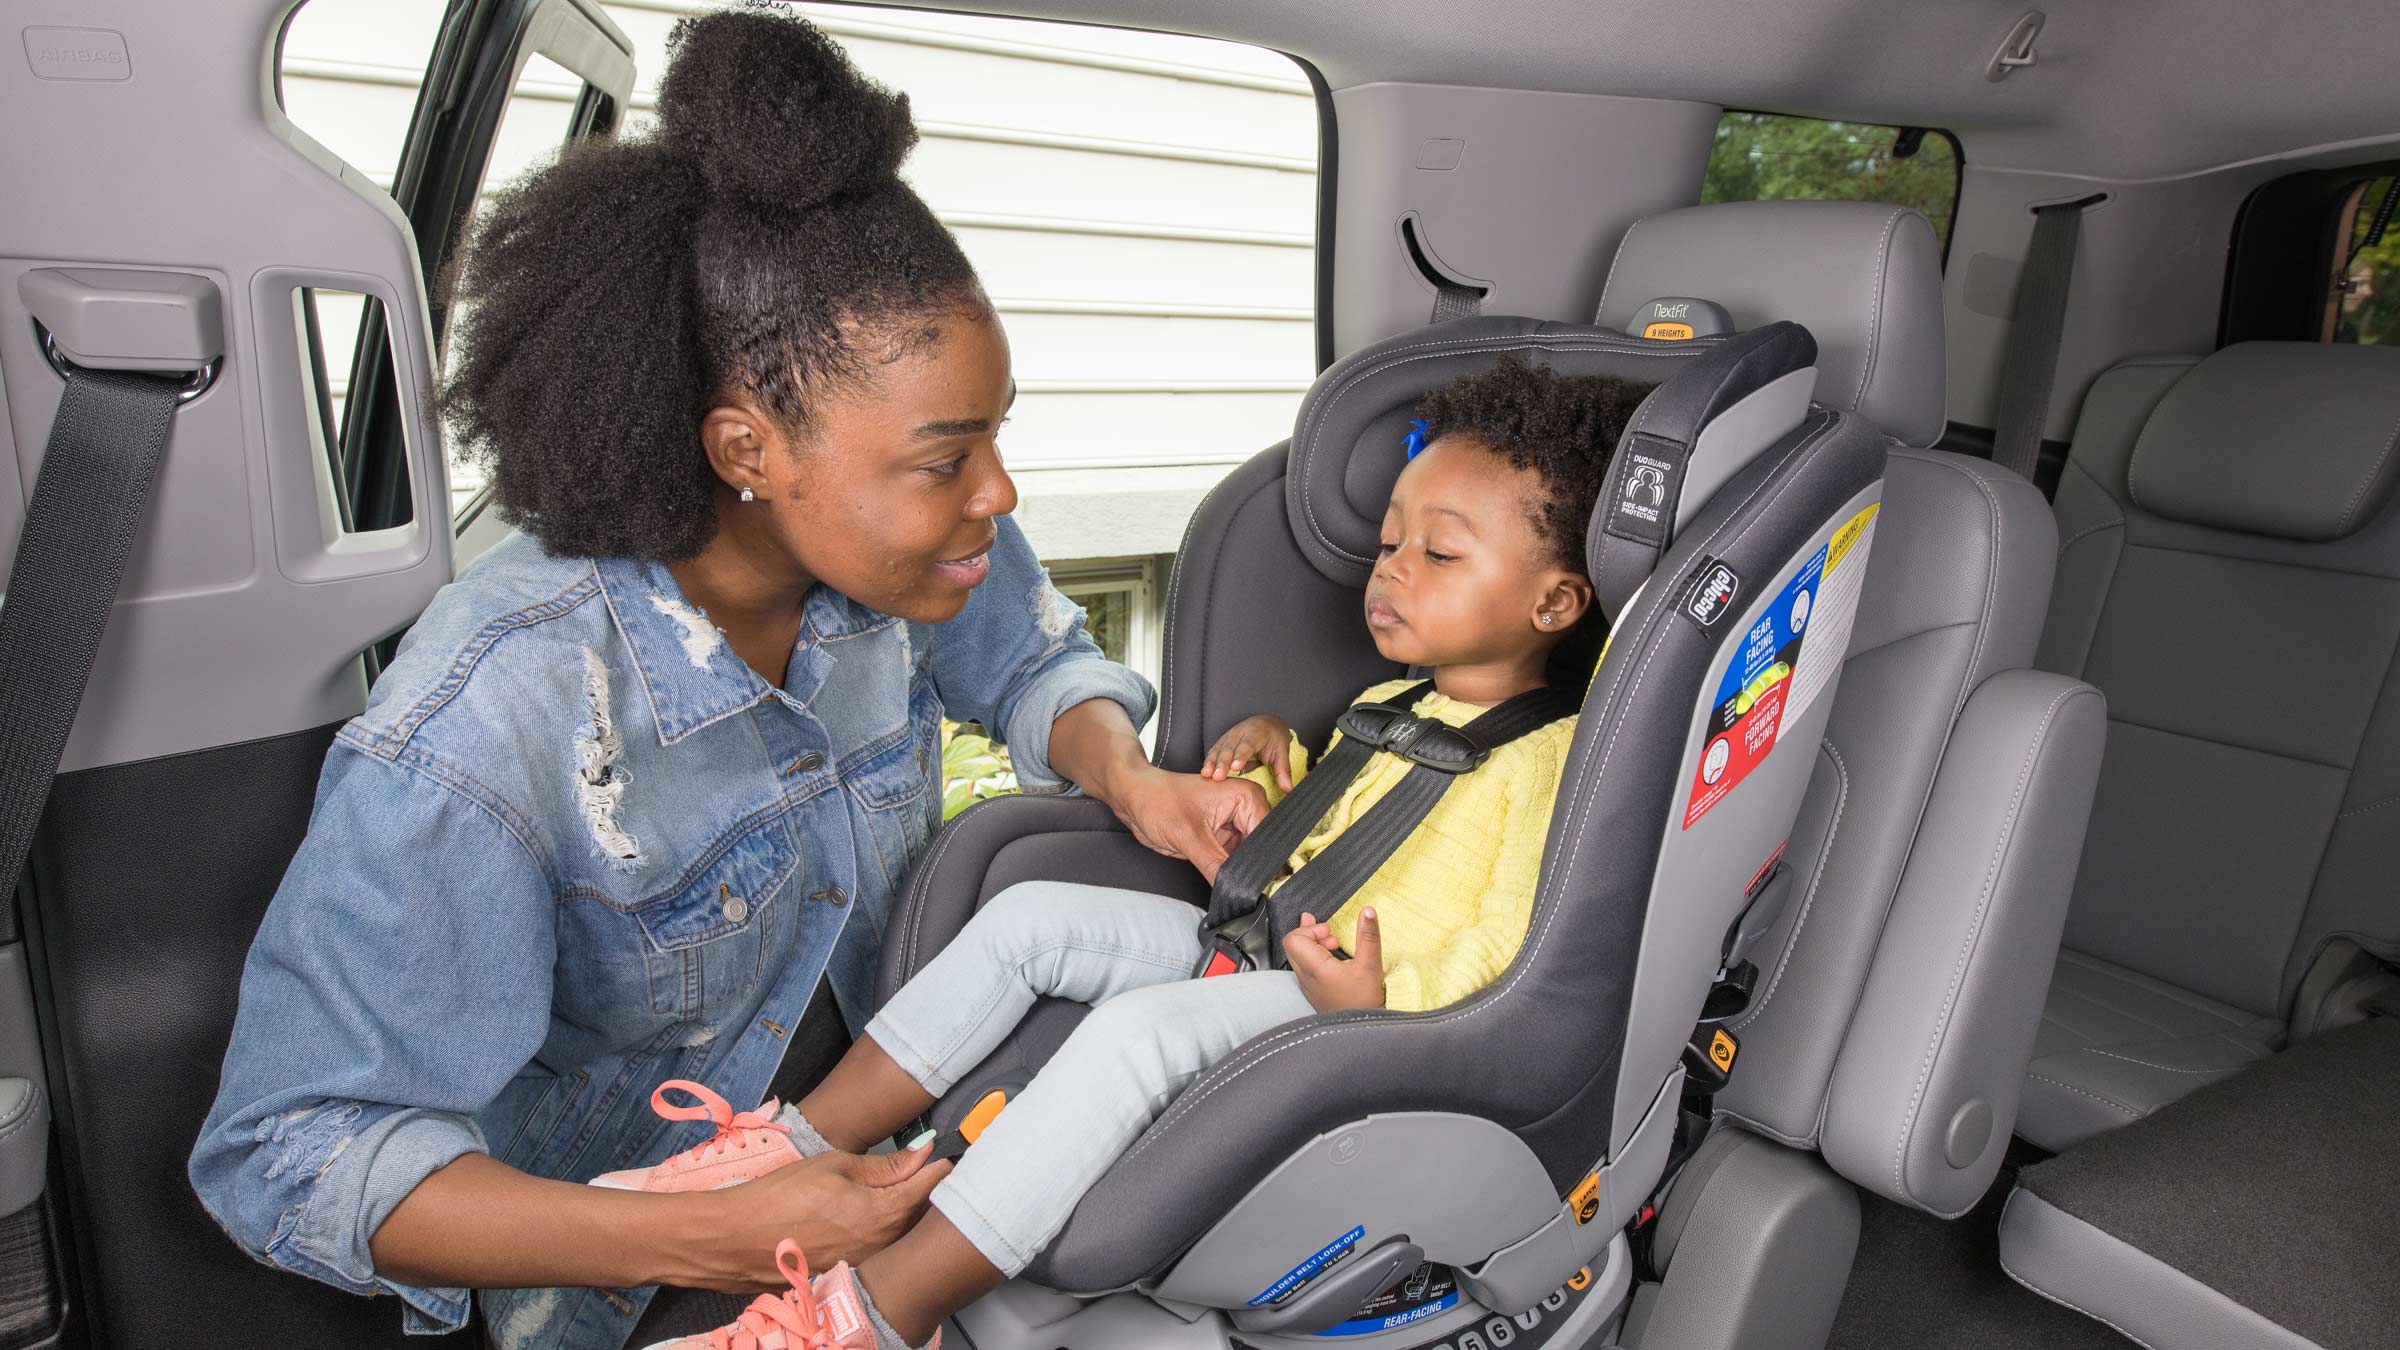 A driving force in child car seat safety research